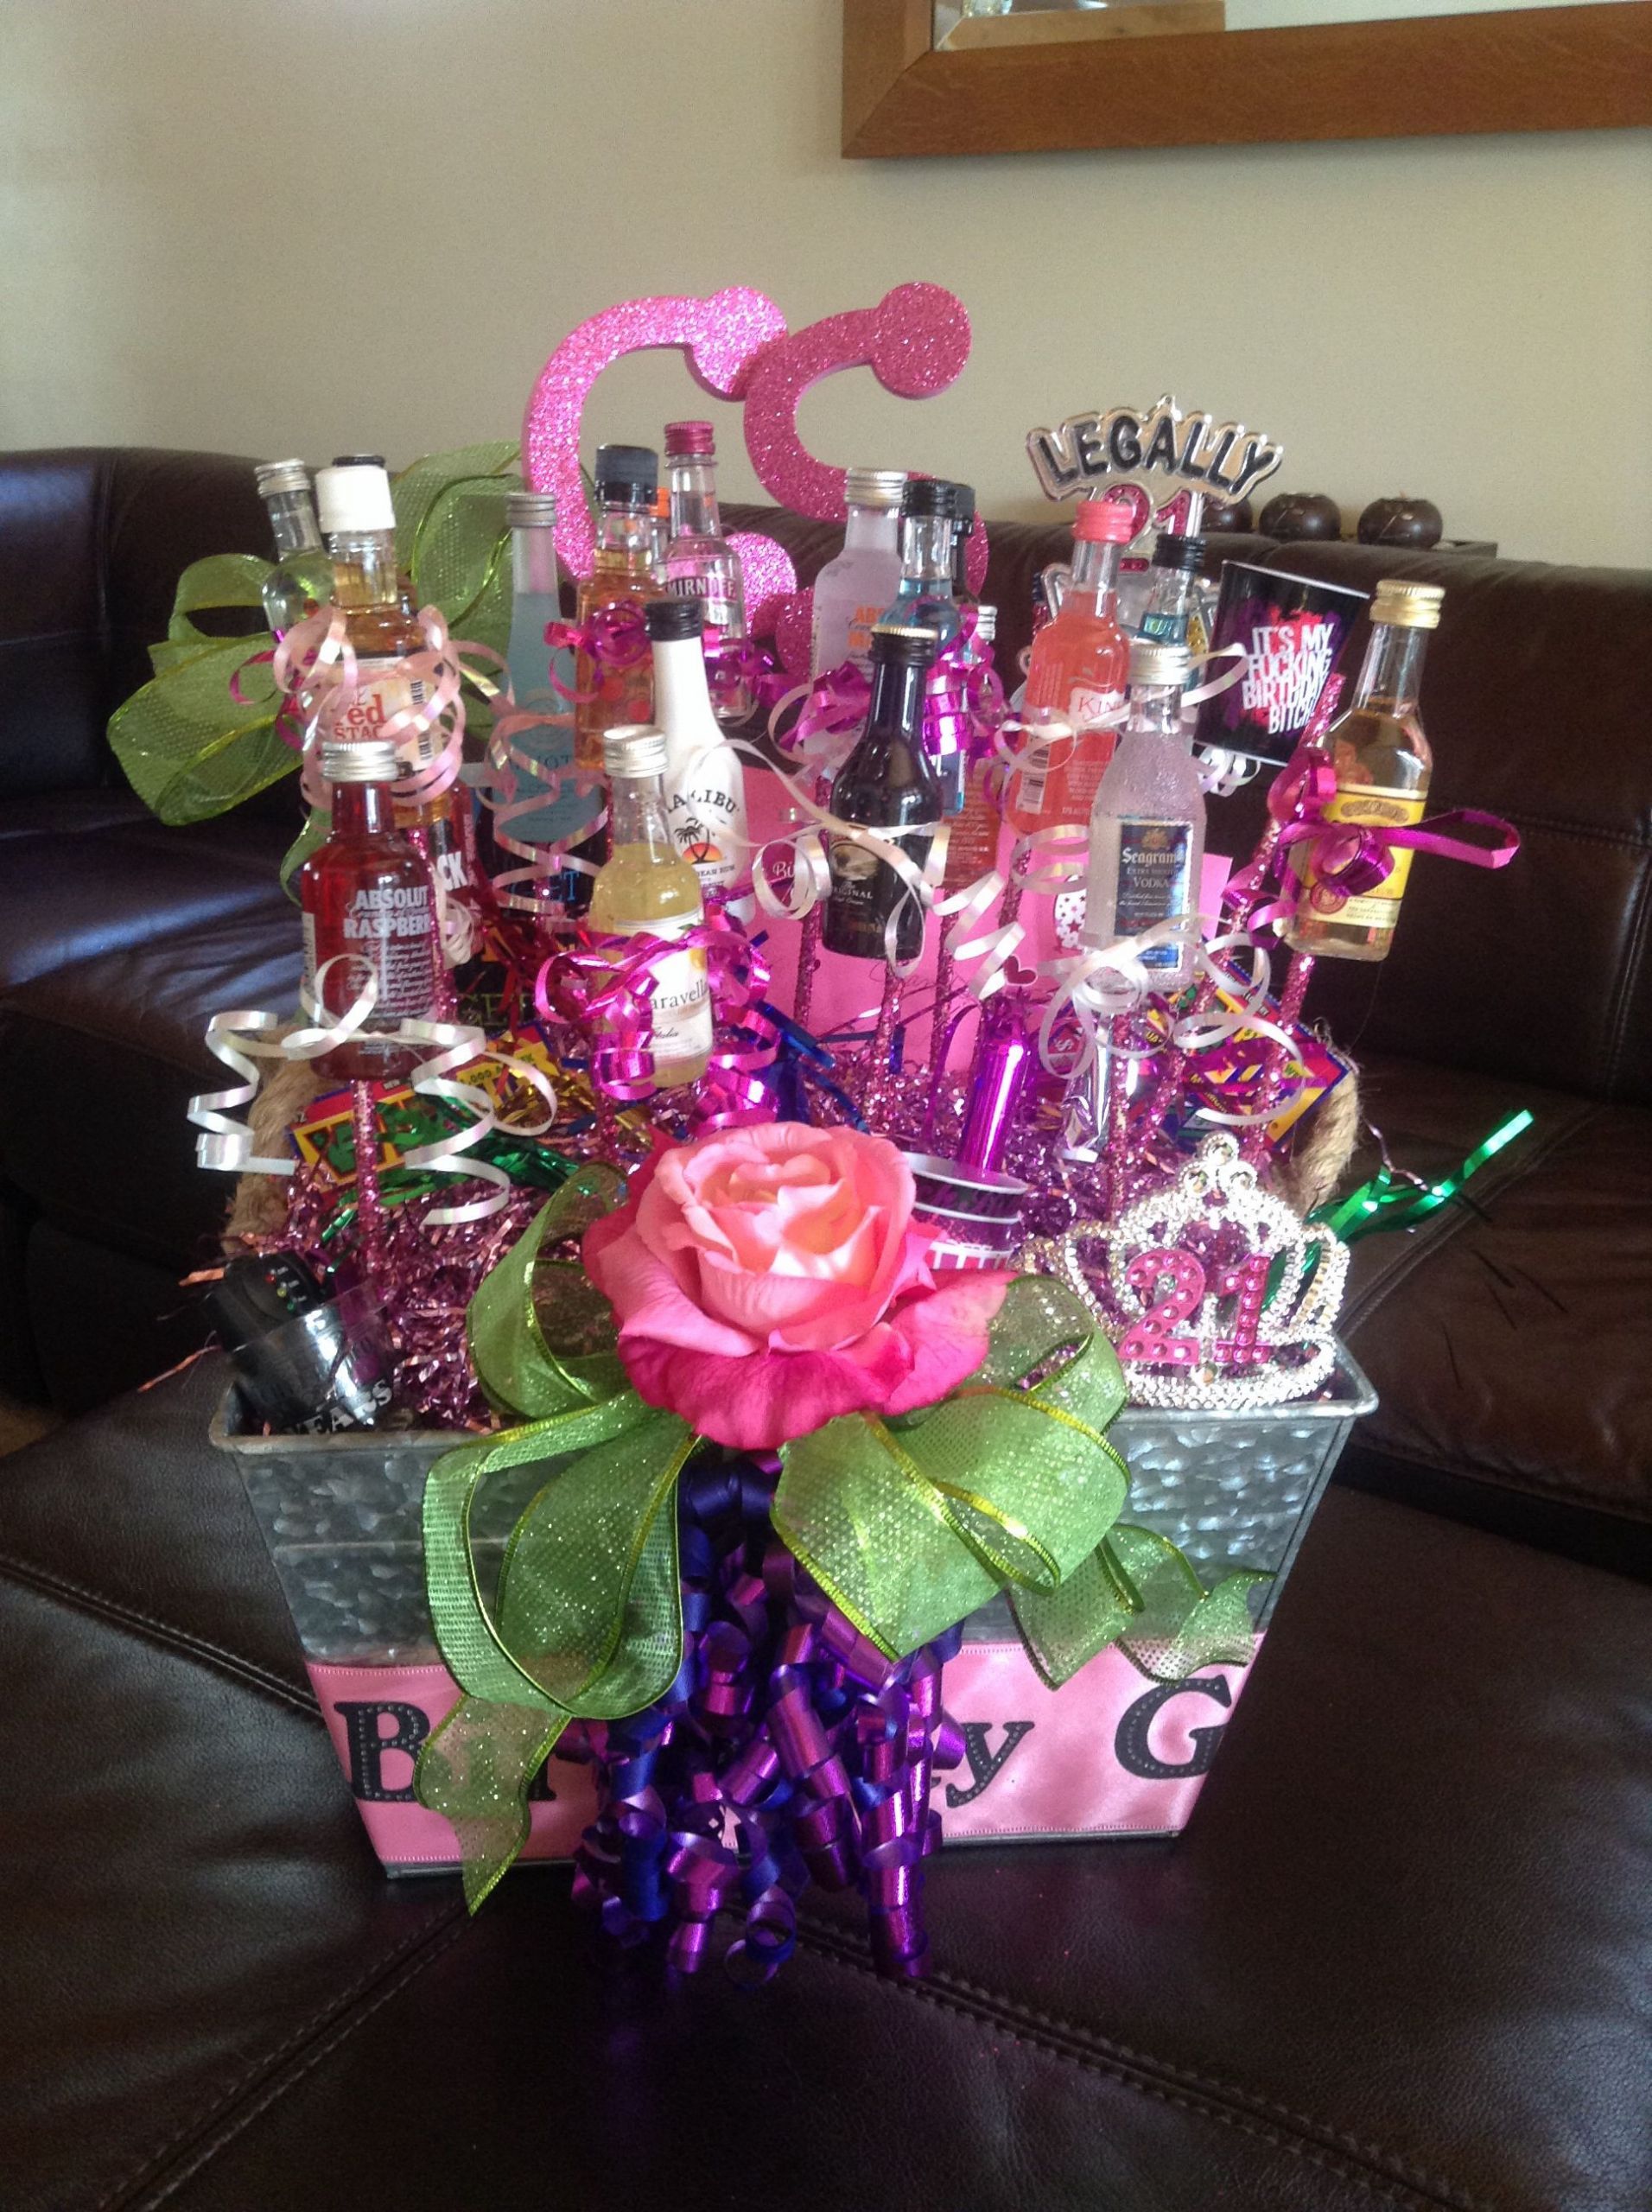 21st Birthday Gift Baskets For Her
 Happy 21st Birthday Gift Basket for my daughter